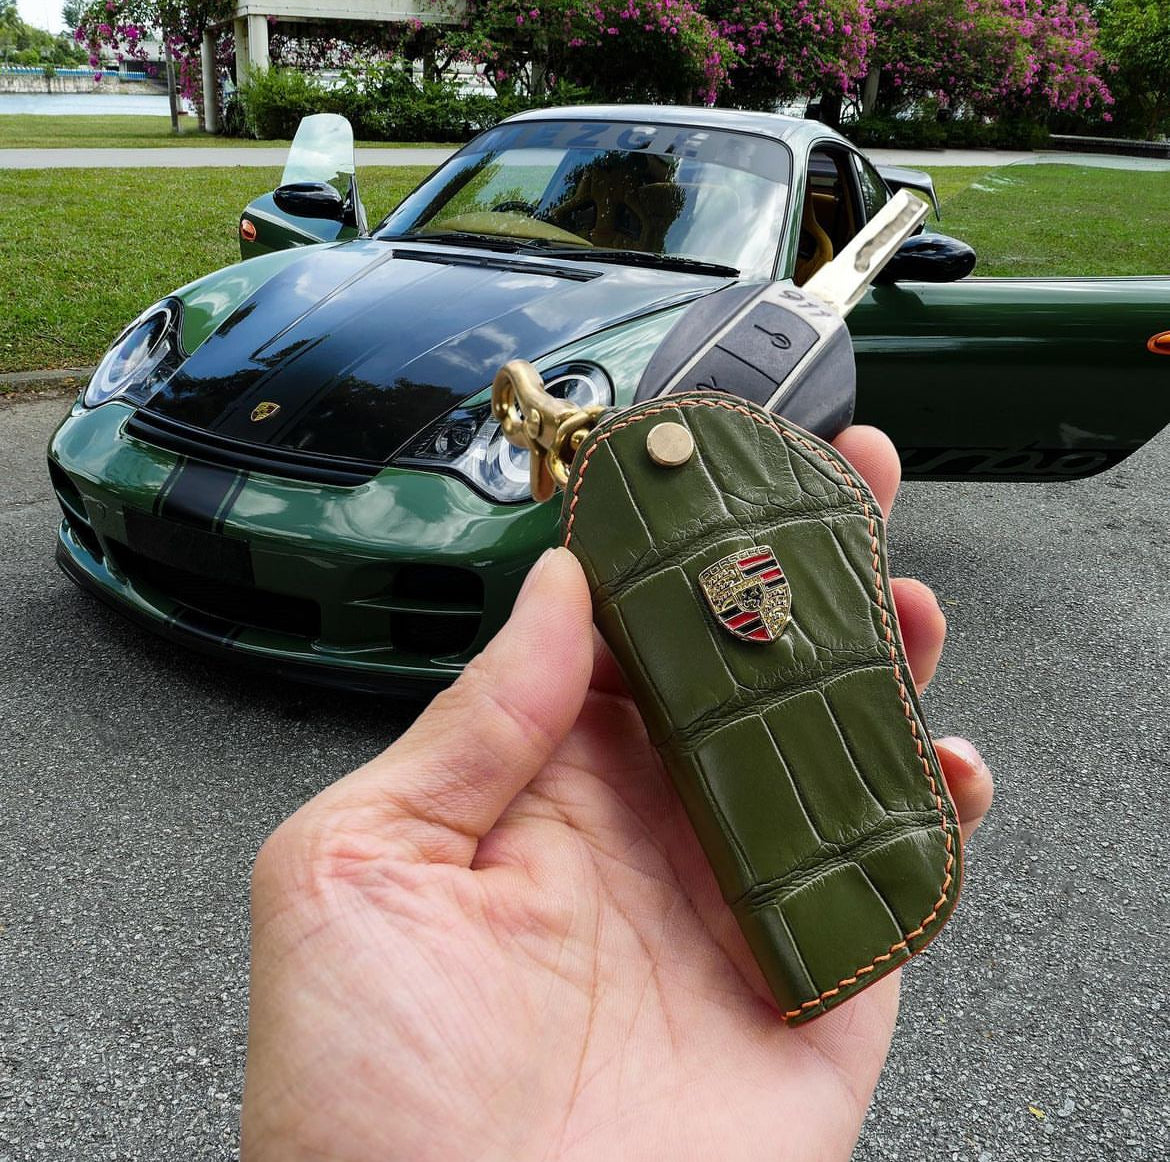 Porsche "Keyed Ignition" Key Fob Cover Type 1 - CUSTOMIZE YOURS